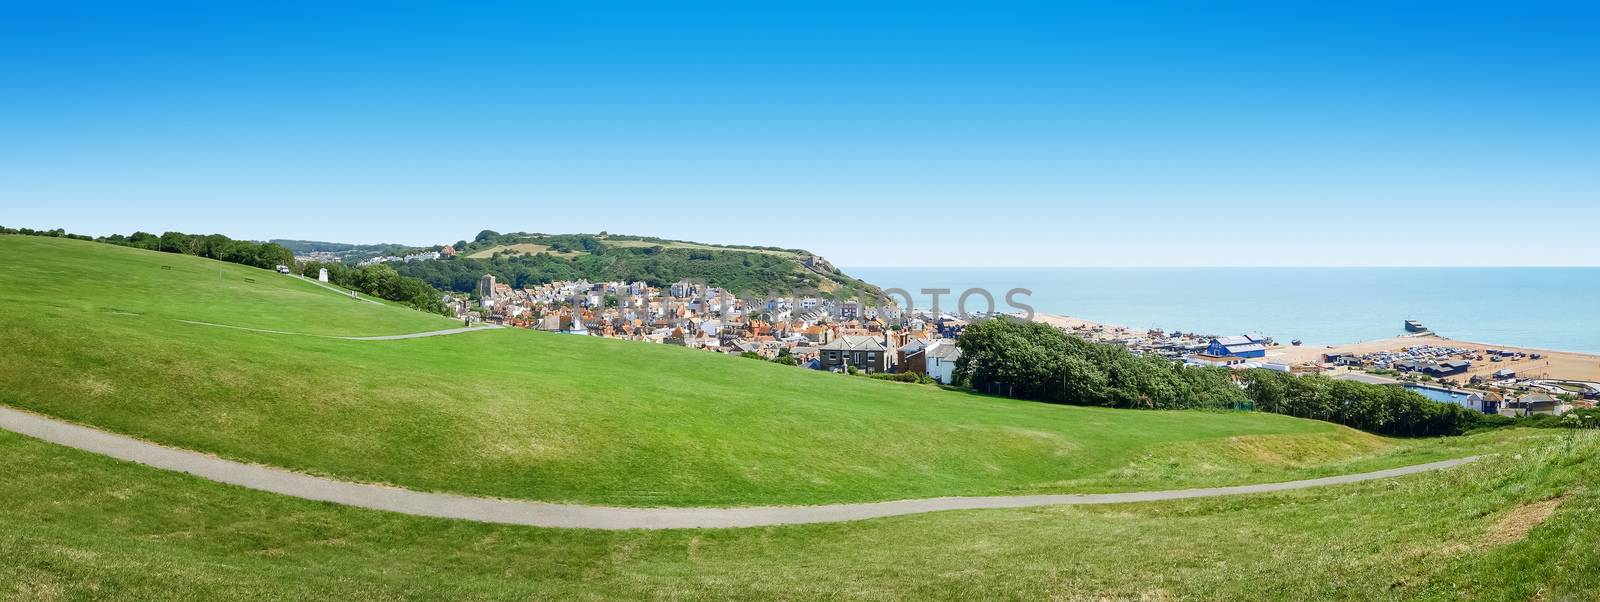 A panoramic view of the historic Hastings in England